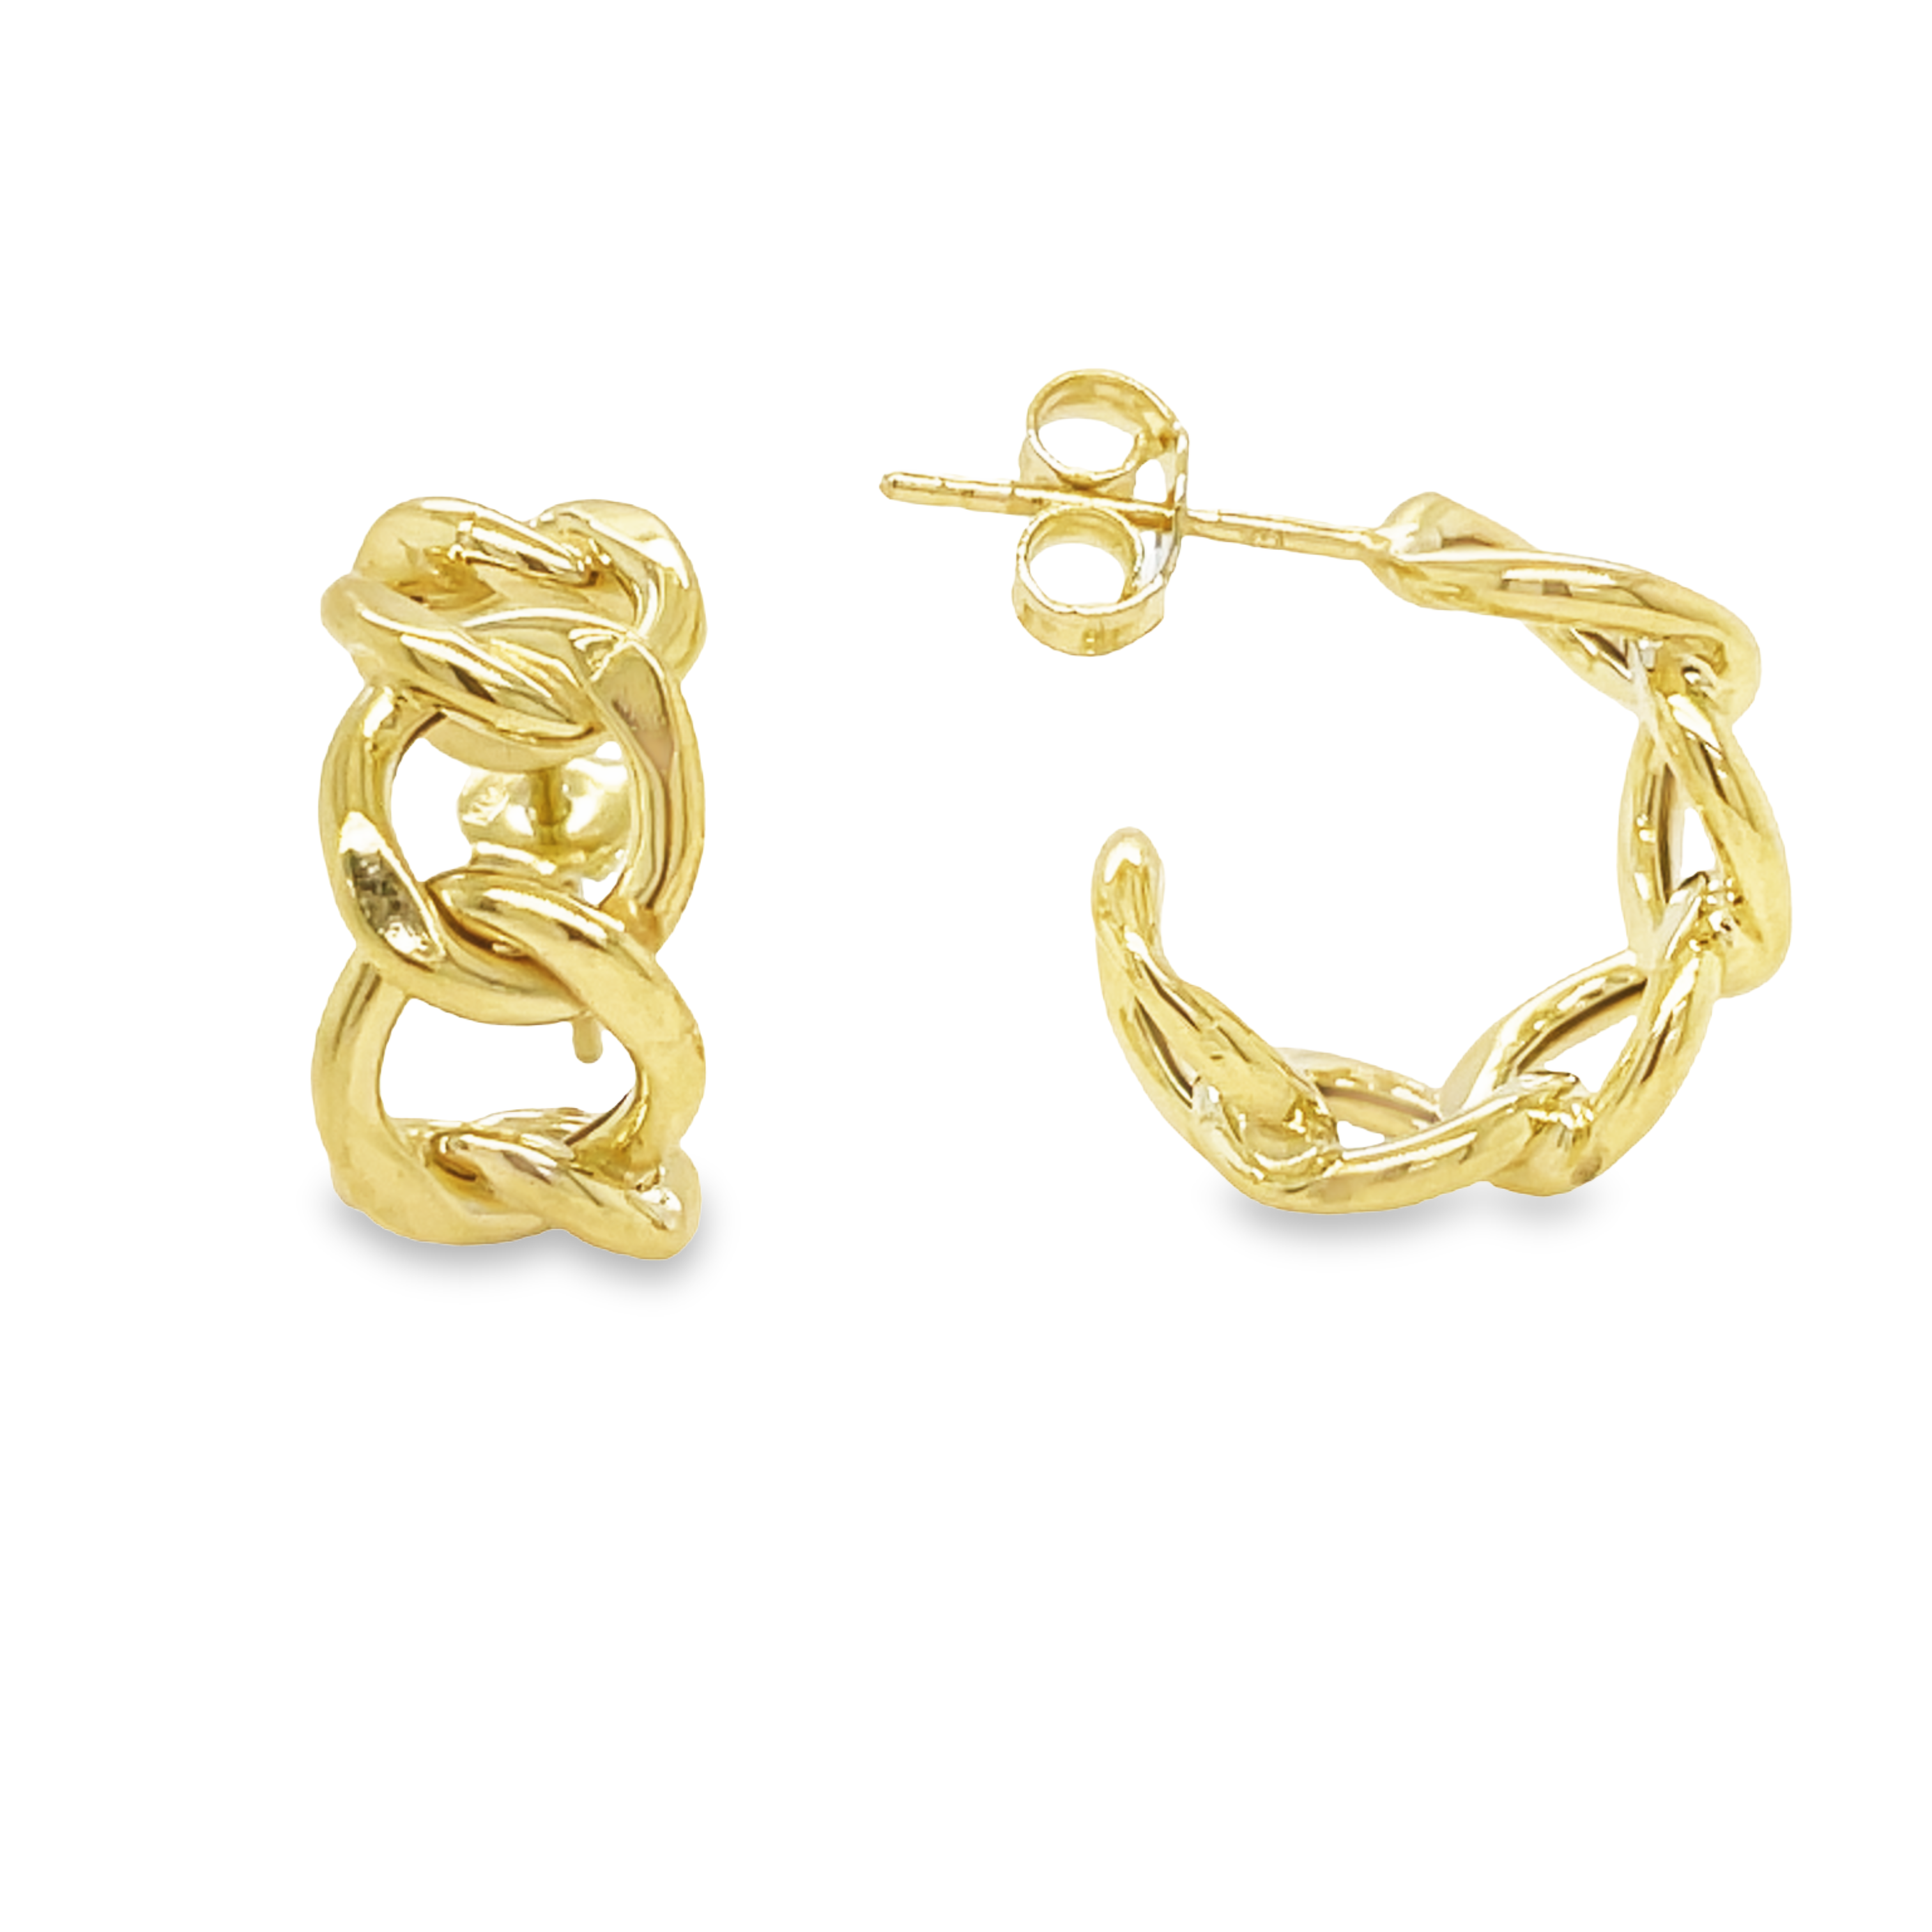 These classic 14k Italian Yellow Gold Open Link Hoop Earrings offer timeless sophistication in a lightweight design. These earrings are 16.00 mm in size and feature friction backs for a secure fit to your ear. Crafted with authentic Italian gold, they'll make a stylish addition to your jewelry collection.